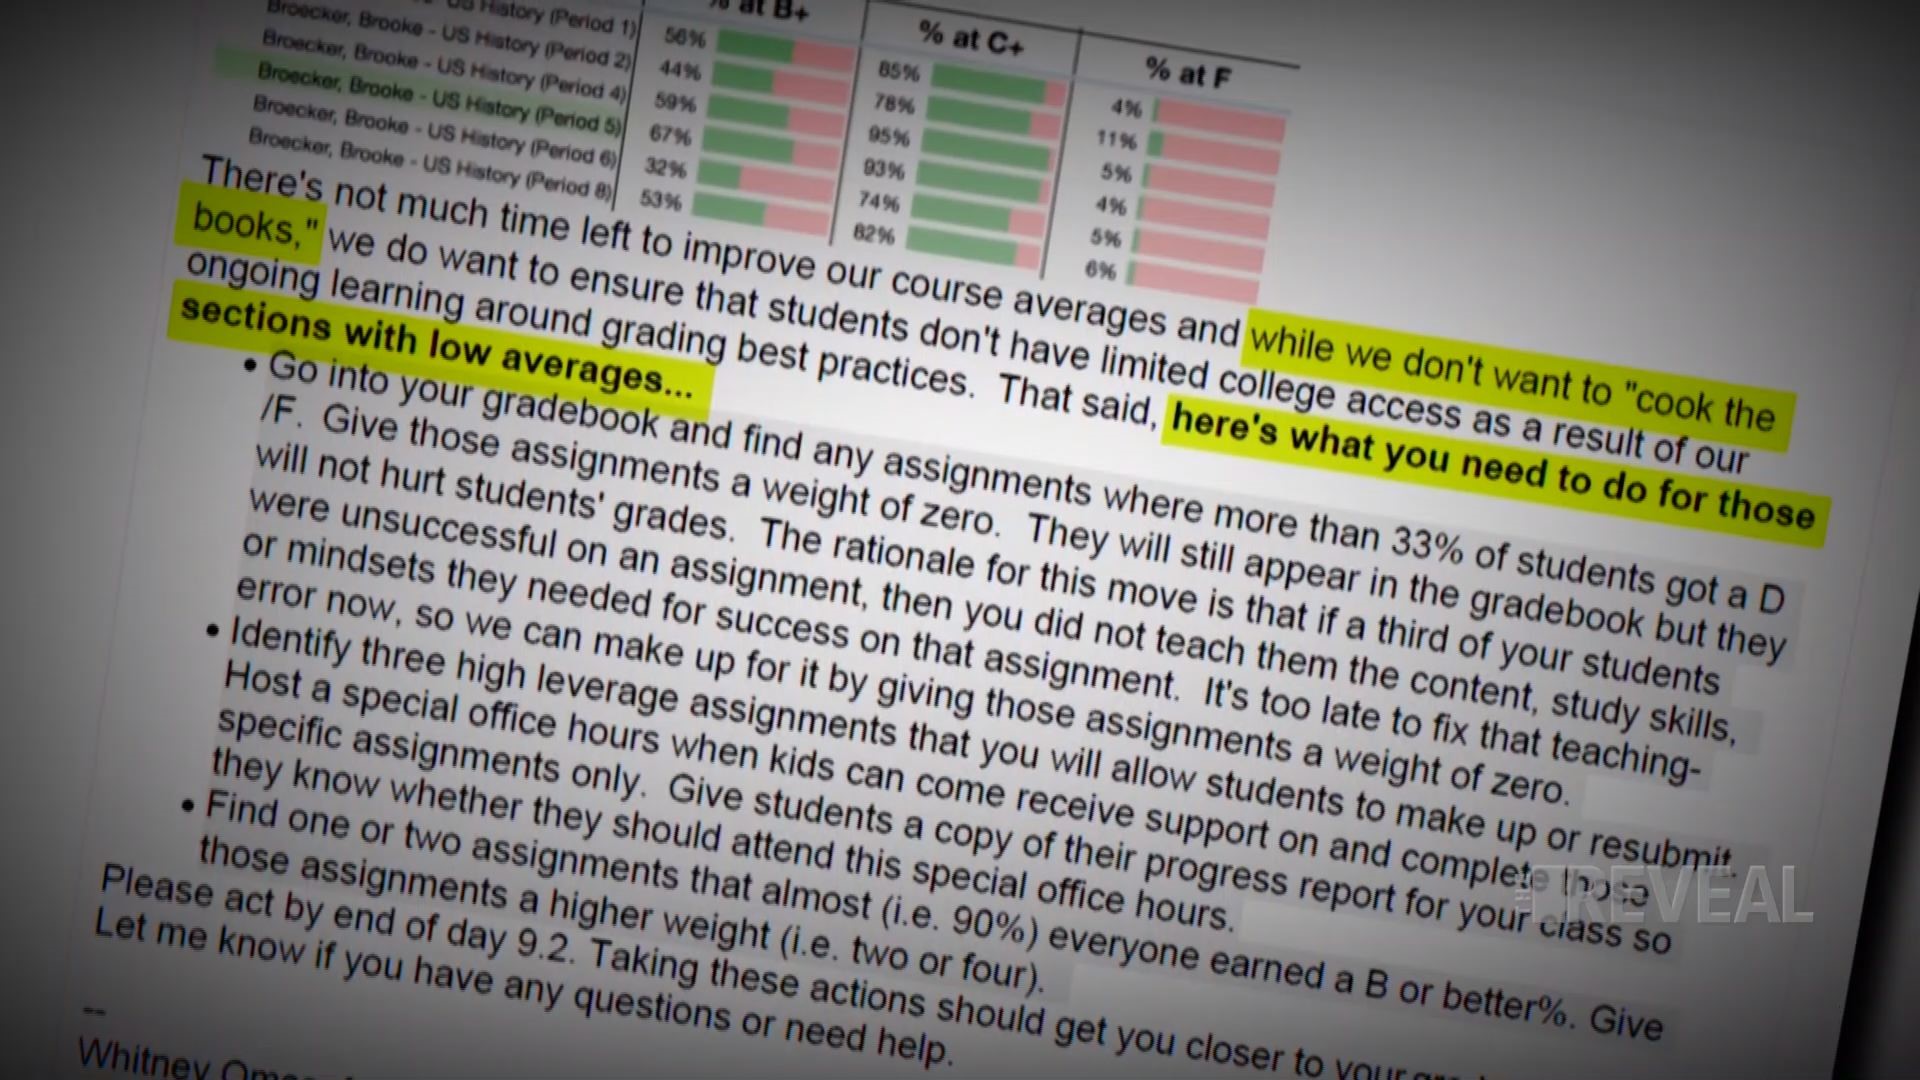 Through emails teachers in New Orleans were told how to manipulate their students' grade-point averages. This is the latest cheating scandal exposed.